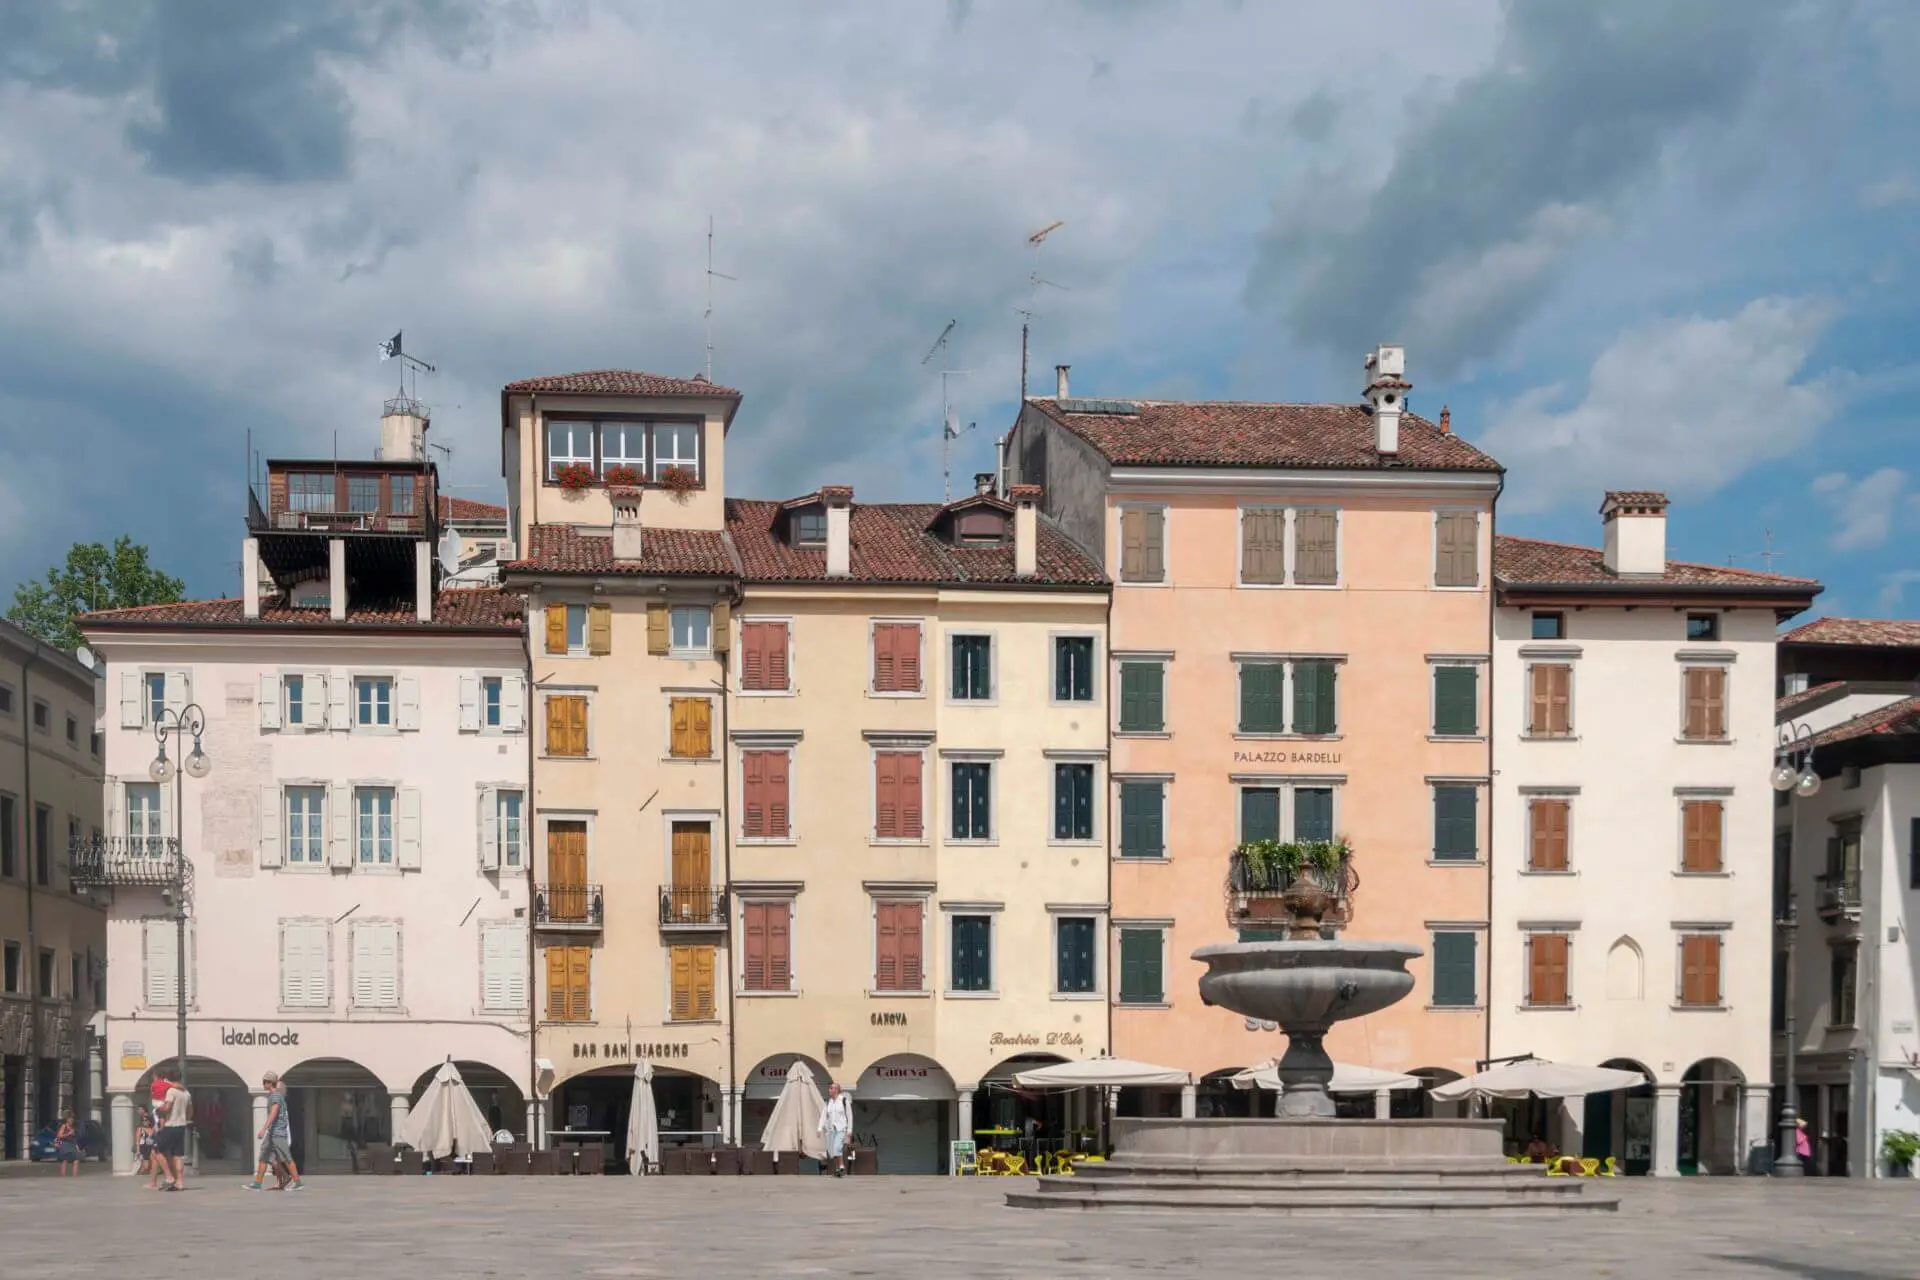 Piazza Square in Udine Italy